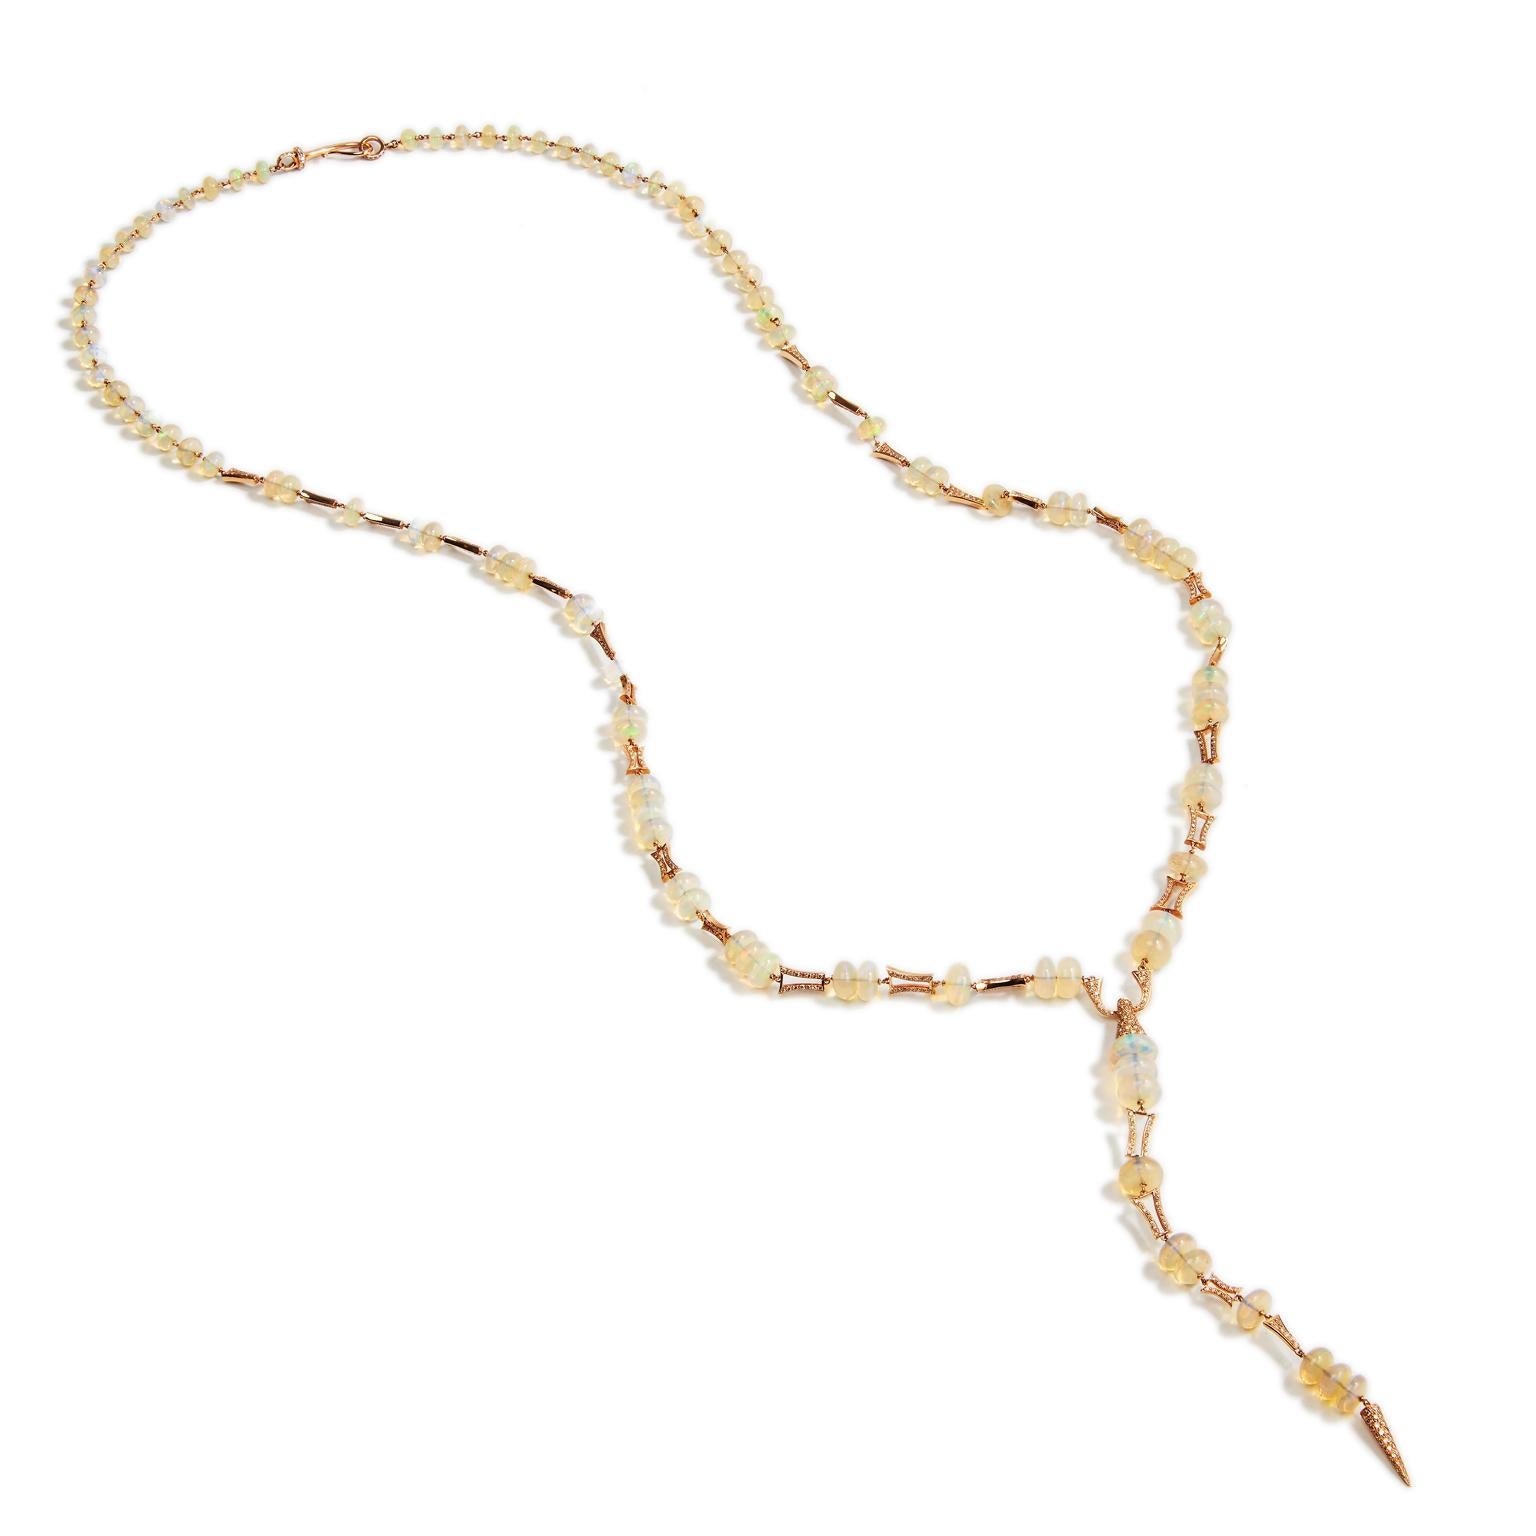 Make a statement to your style with this fashion forward rose gold 34 inch necklace. Highlighted with 1.84 carats of pave-set brown diamonds, and 72.90 carats in total weight of beautifully translucent Opal beads.